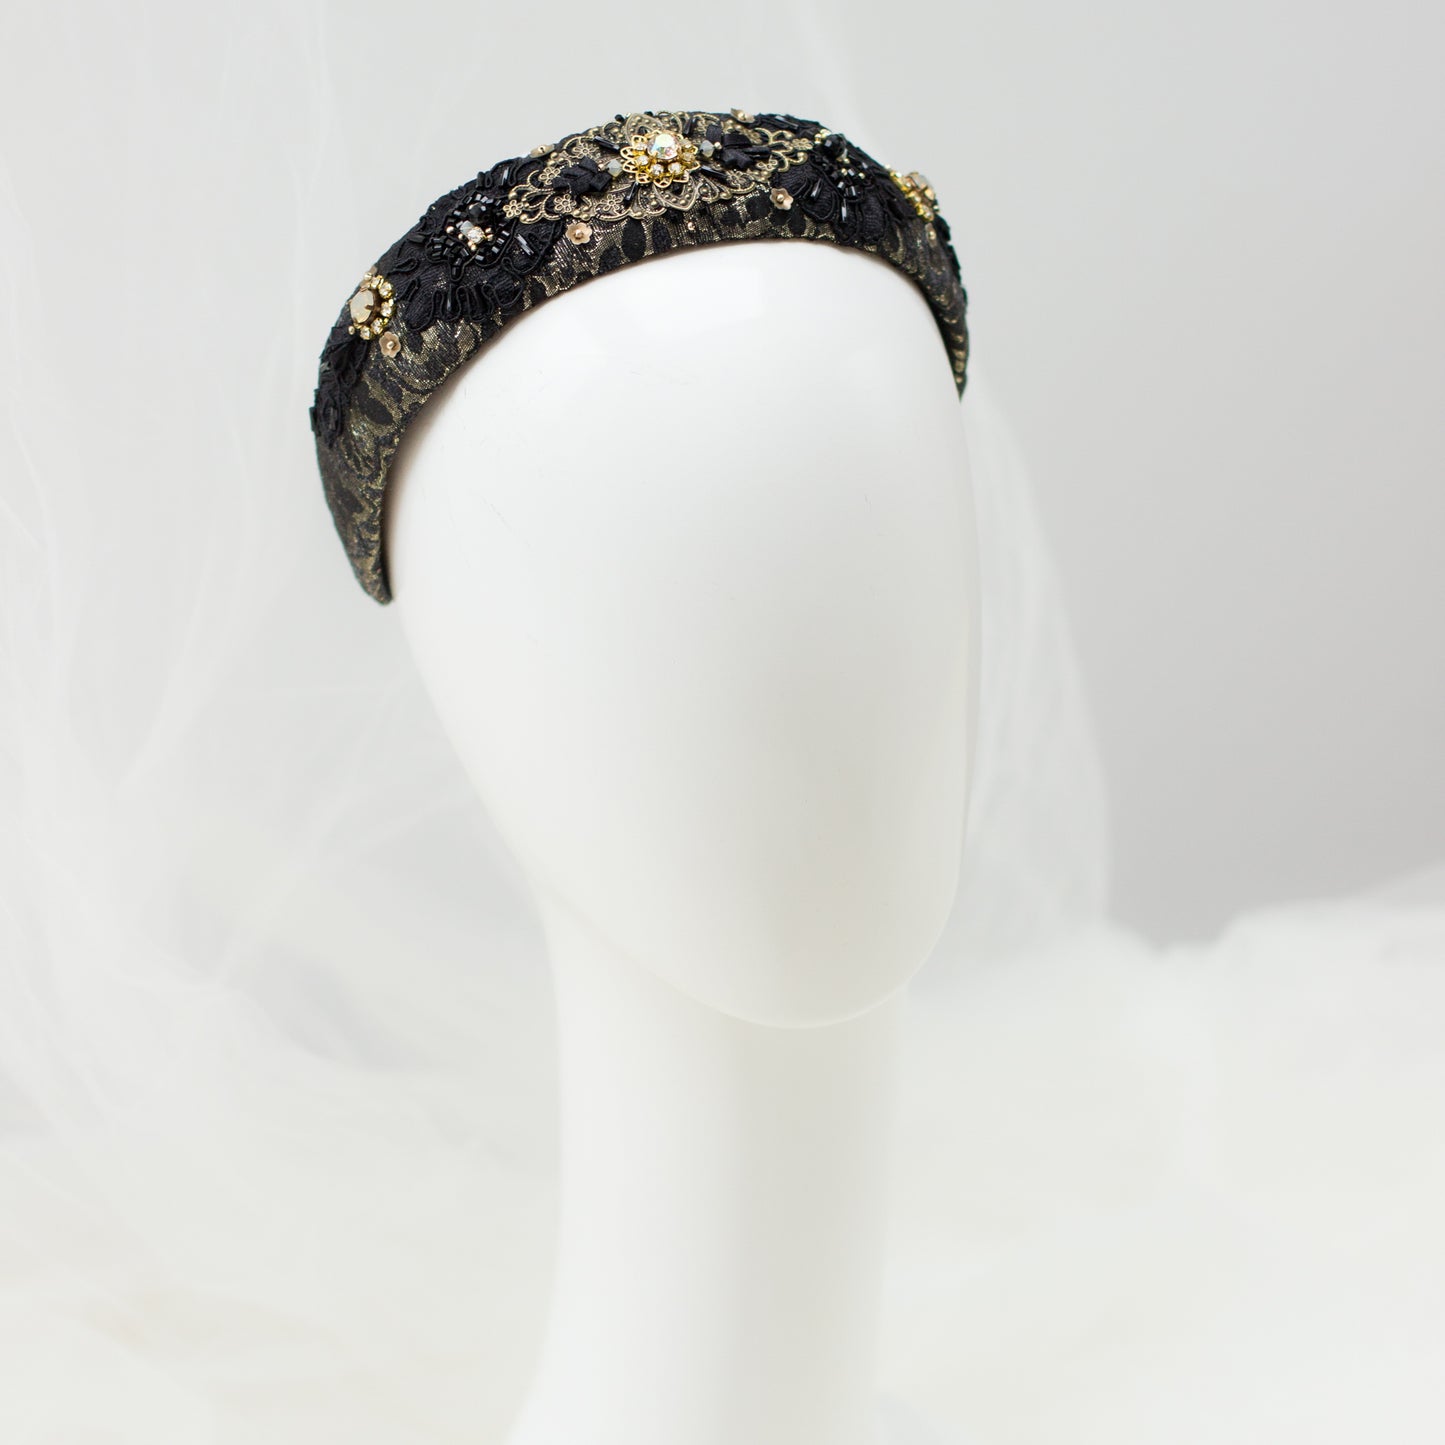 Wide Black Gold embroidered headband. Premium accessories. Excellent gift. A versatile accessory that is a must-have in every wardrobe. Handmade hair accessories. OOAK accessories. Lace headpiece. Gift idea. Fashion accessories. Fascinator